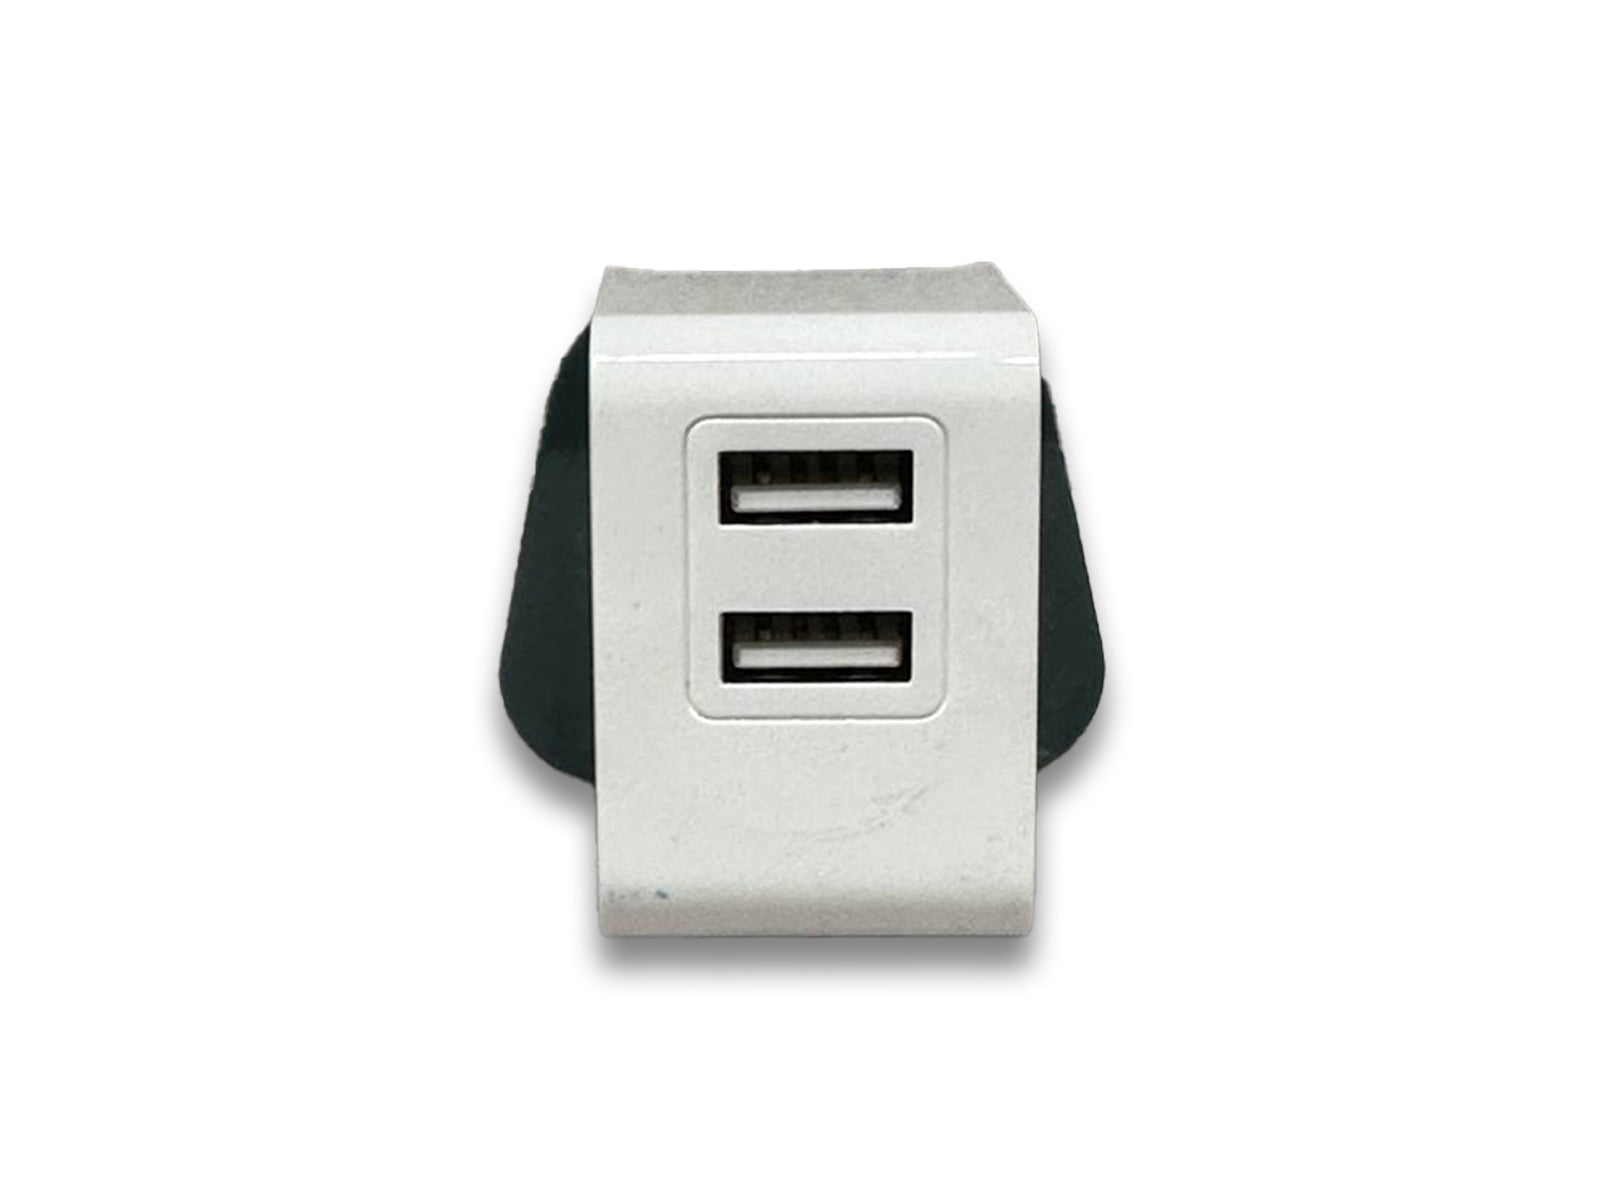 Image shows port view of wall charger on white background